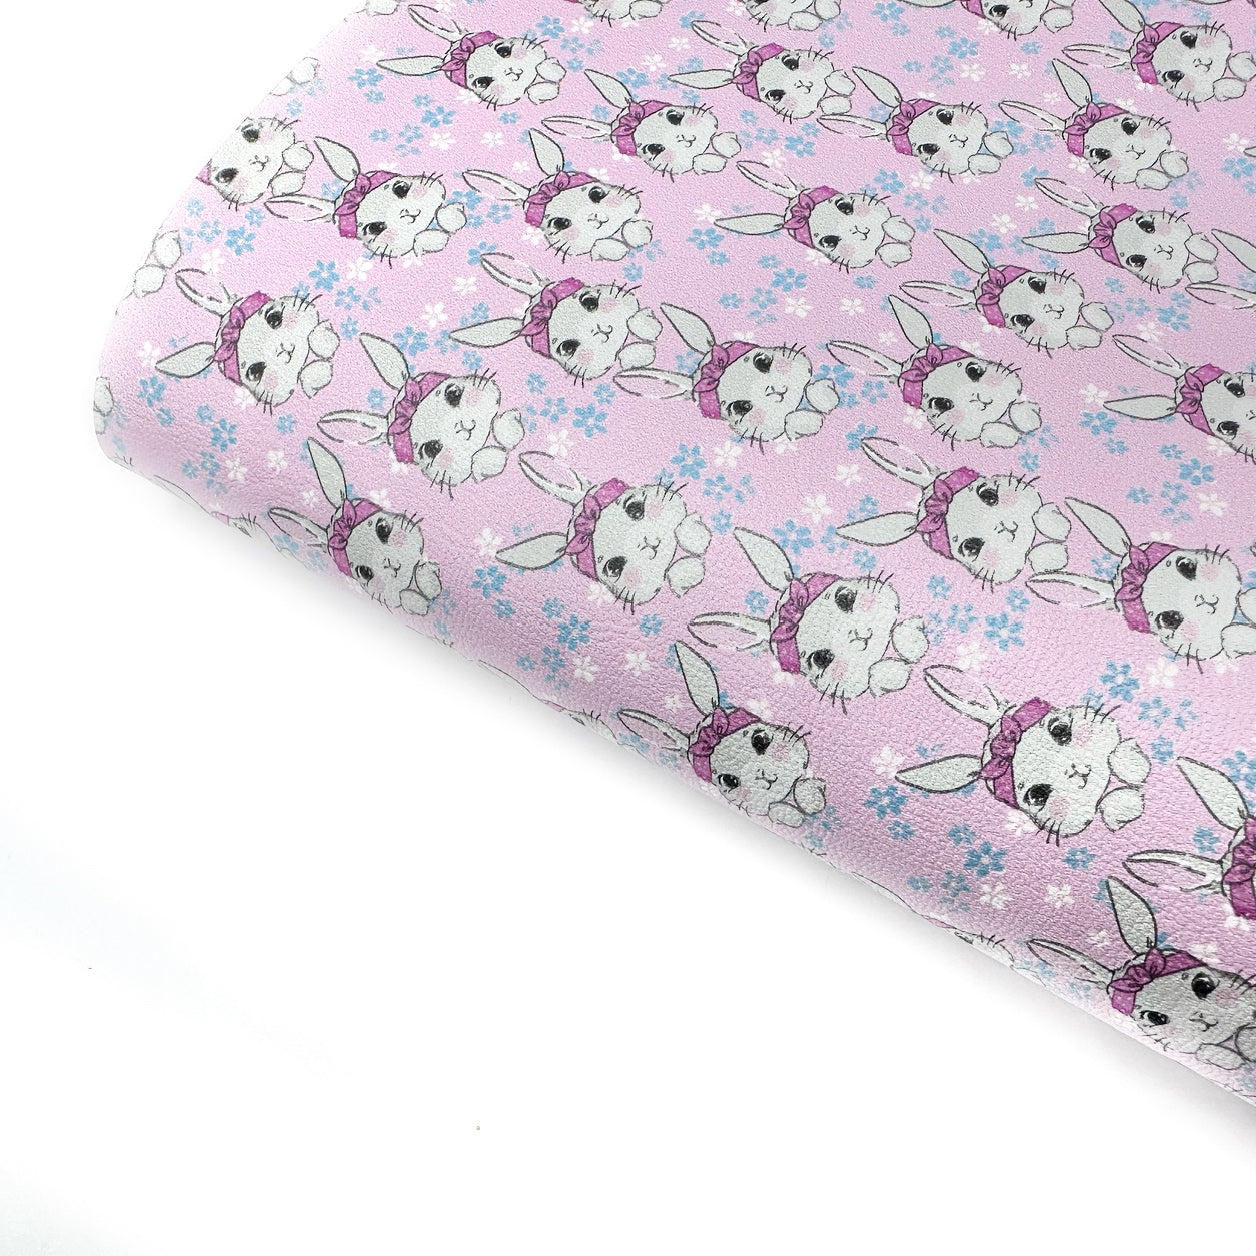 Sweet Little Darling Bunny Girl Premium Faux Leather Fabric Sheets